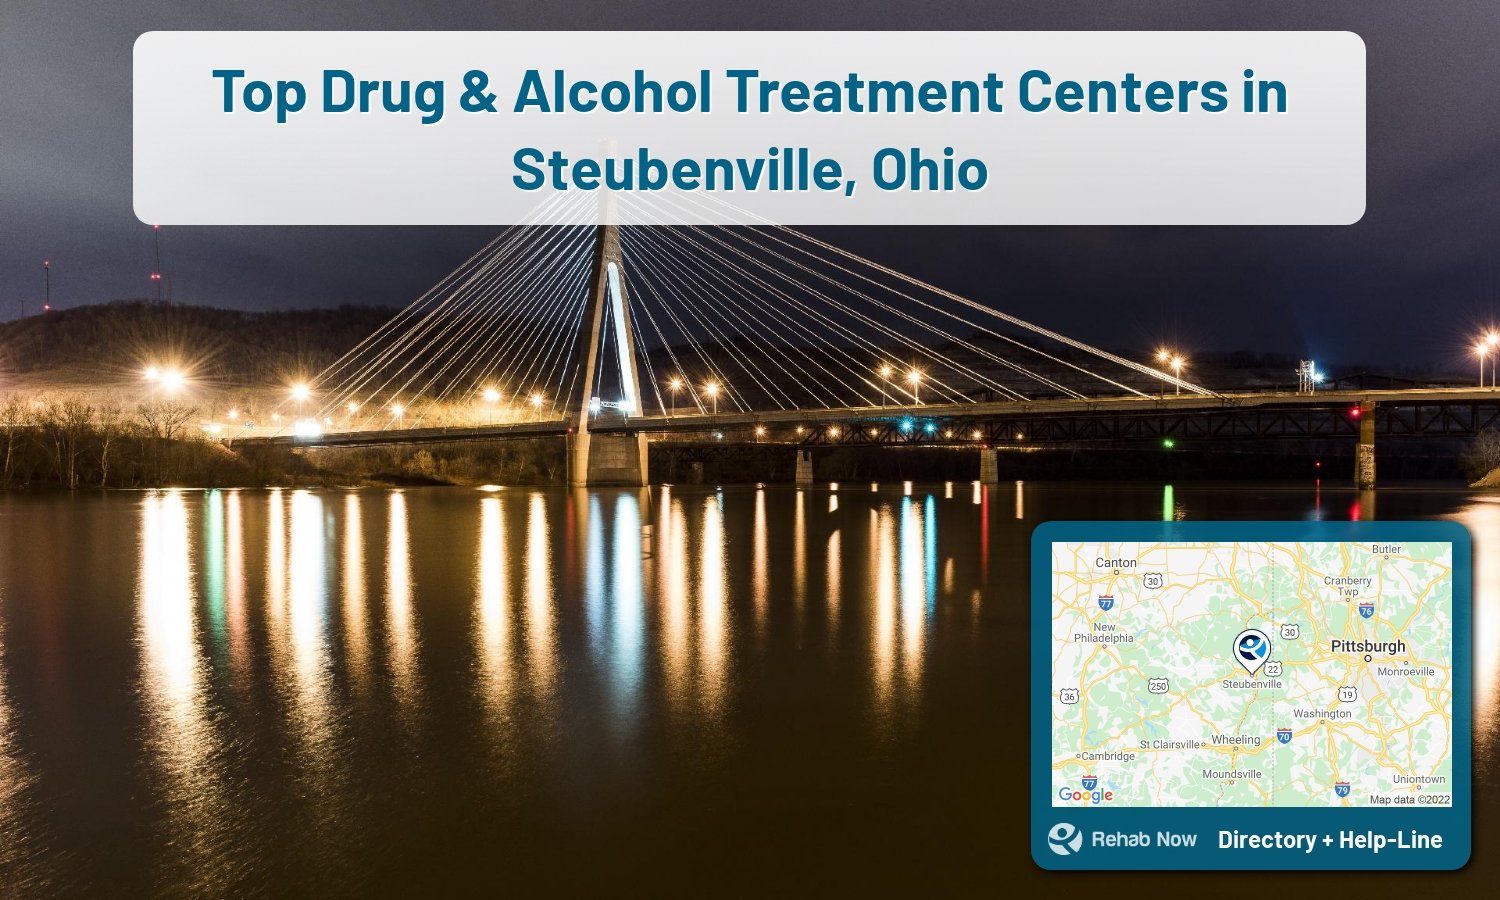 Ready to pick a rehab center in Steubenville? Get off alcohol, opiates, and other drugs, by selecting top drug rehab centers in Ohio